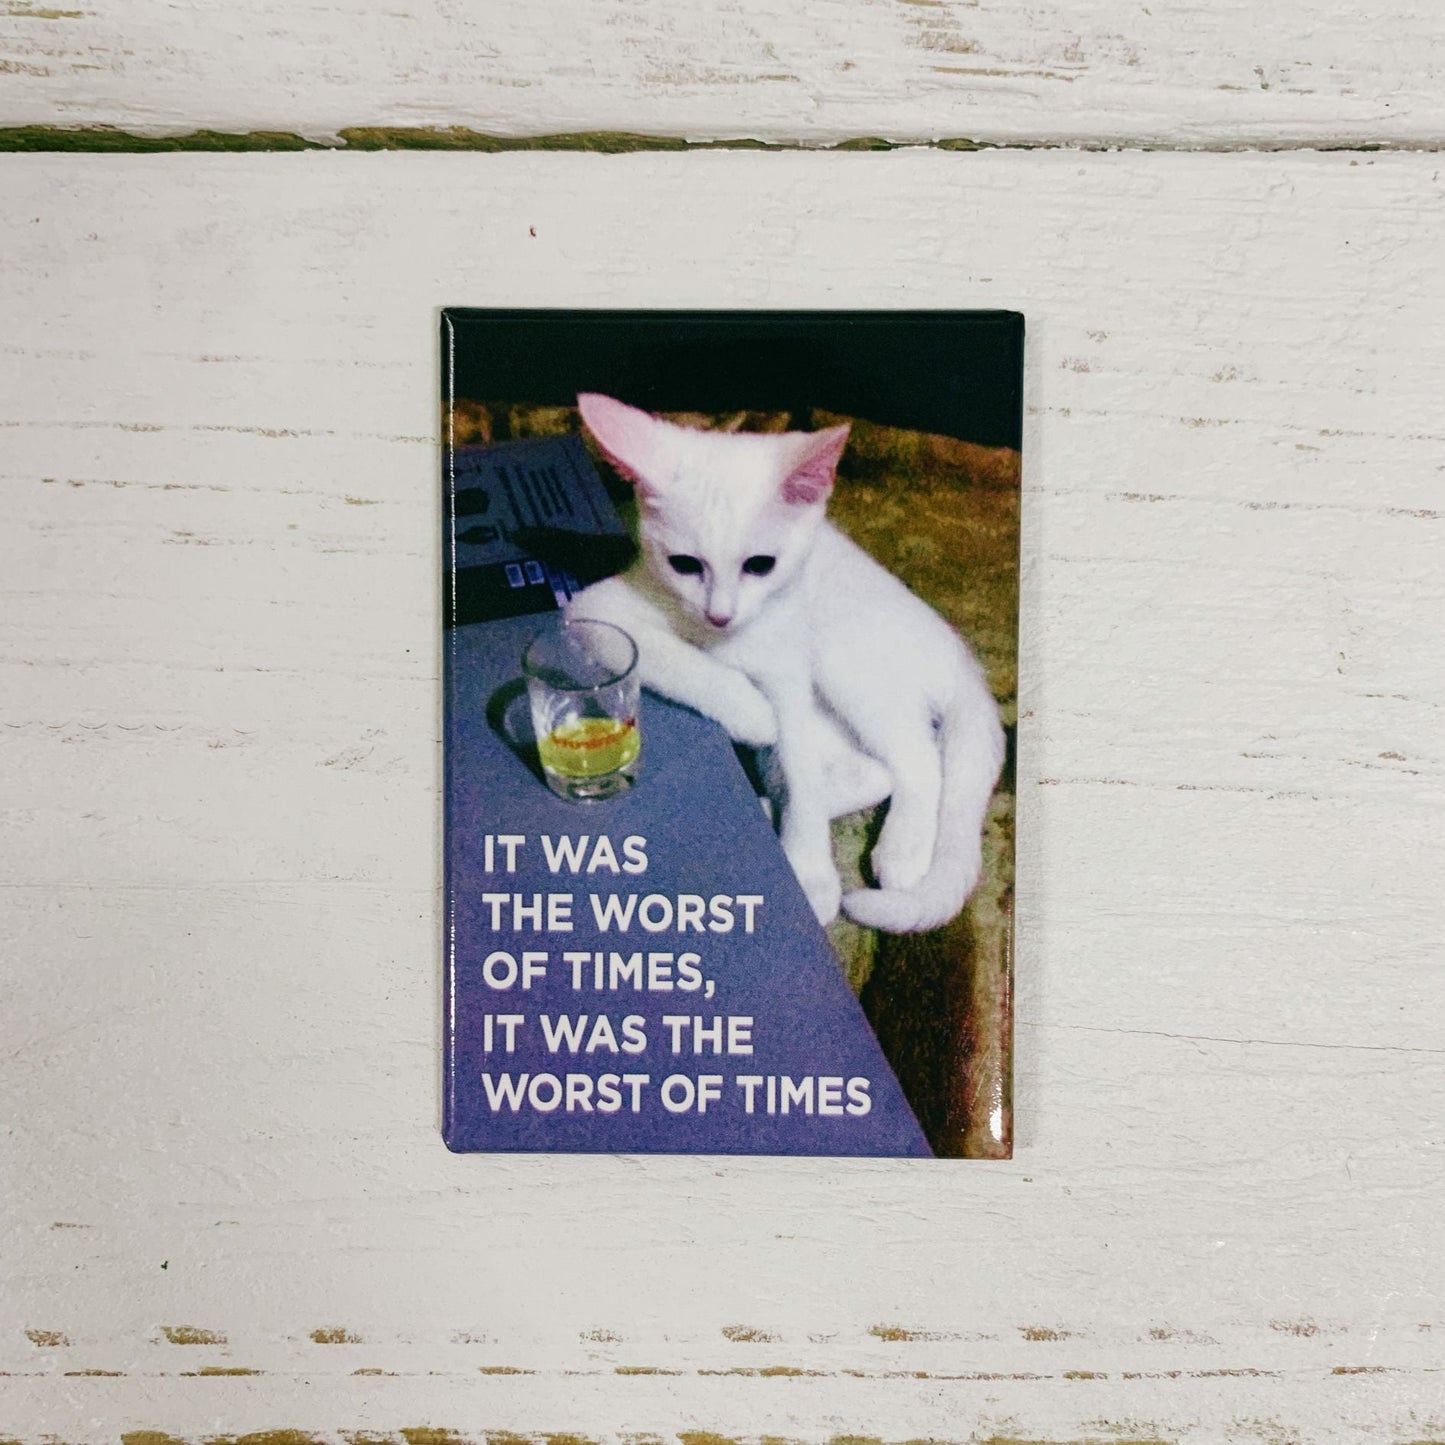 It Was The Worst Of Times, It Was Funny White Cat Magnet | Rectangular Magnetic Surface Fridge Decor | 3" x 2"